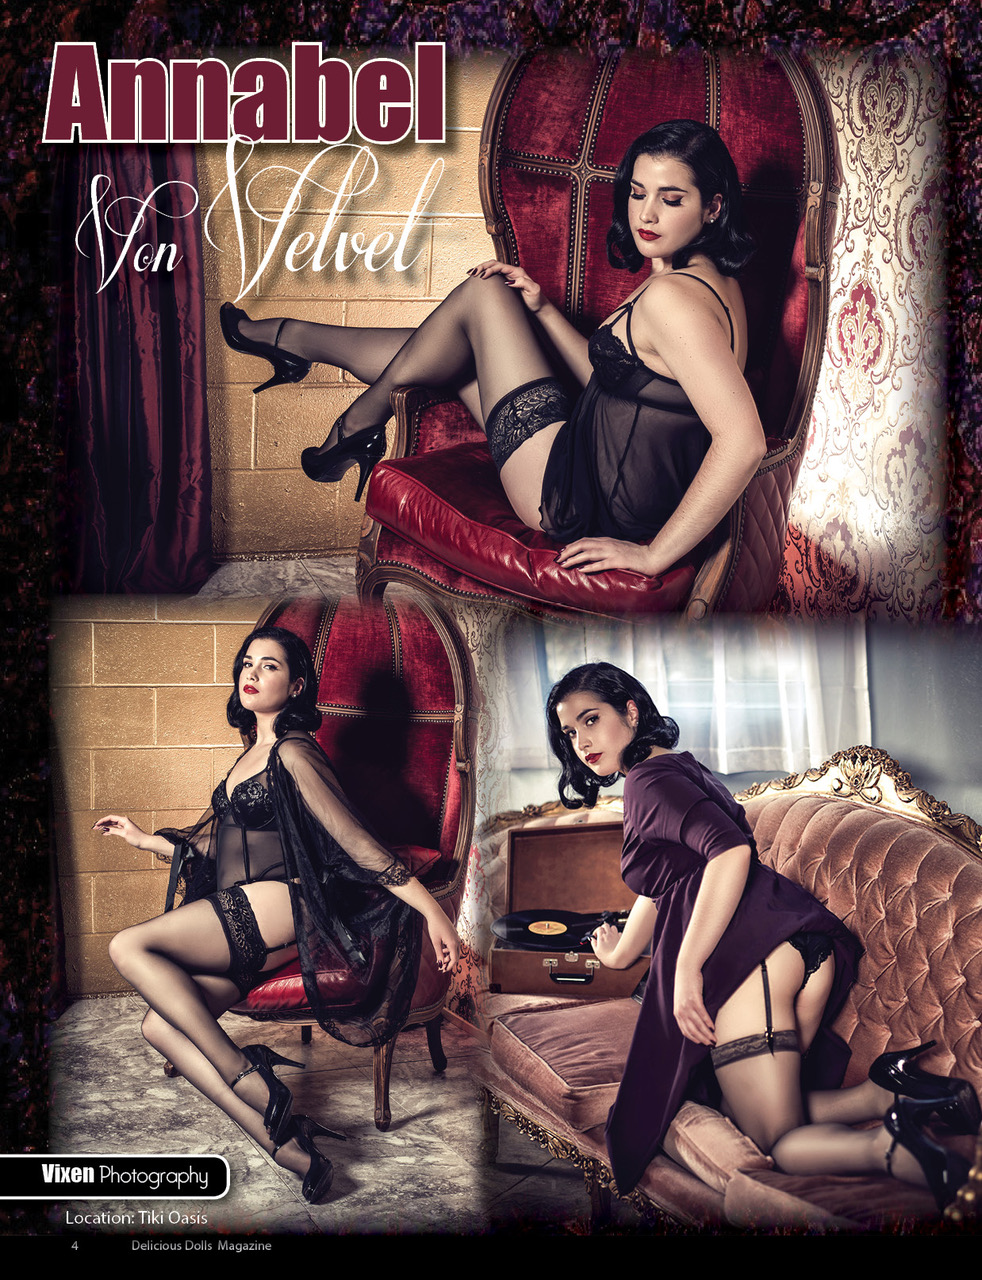 Published Boudoir and Pinup Photography - VIXEN Photography